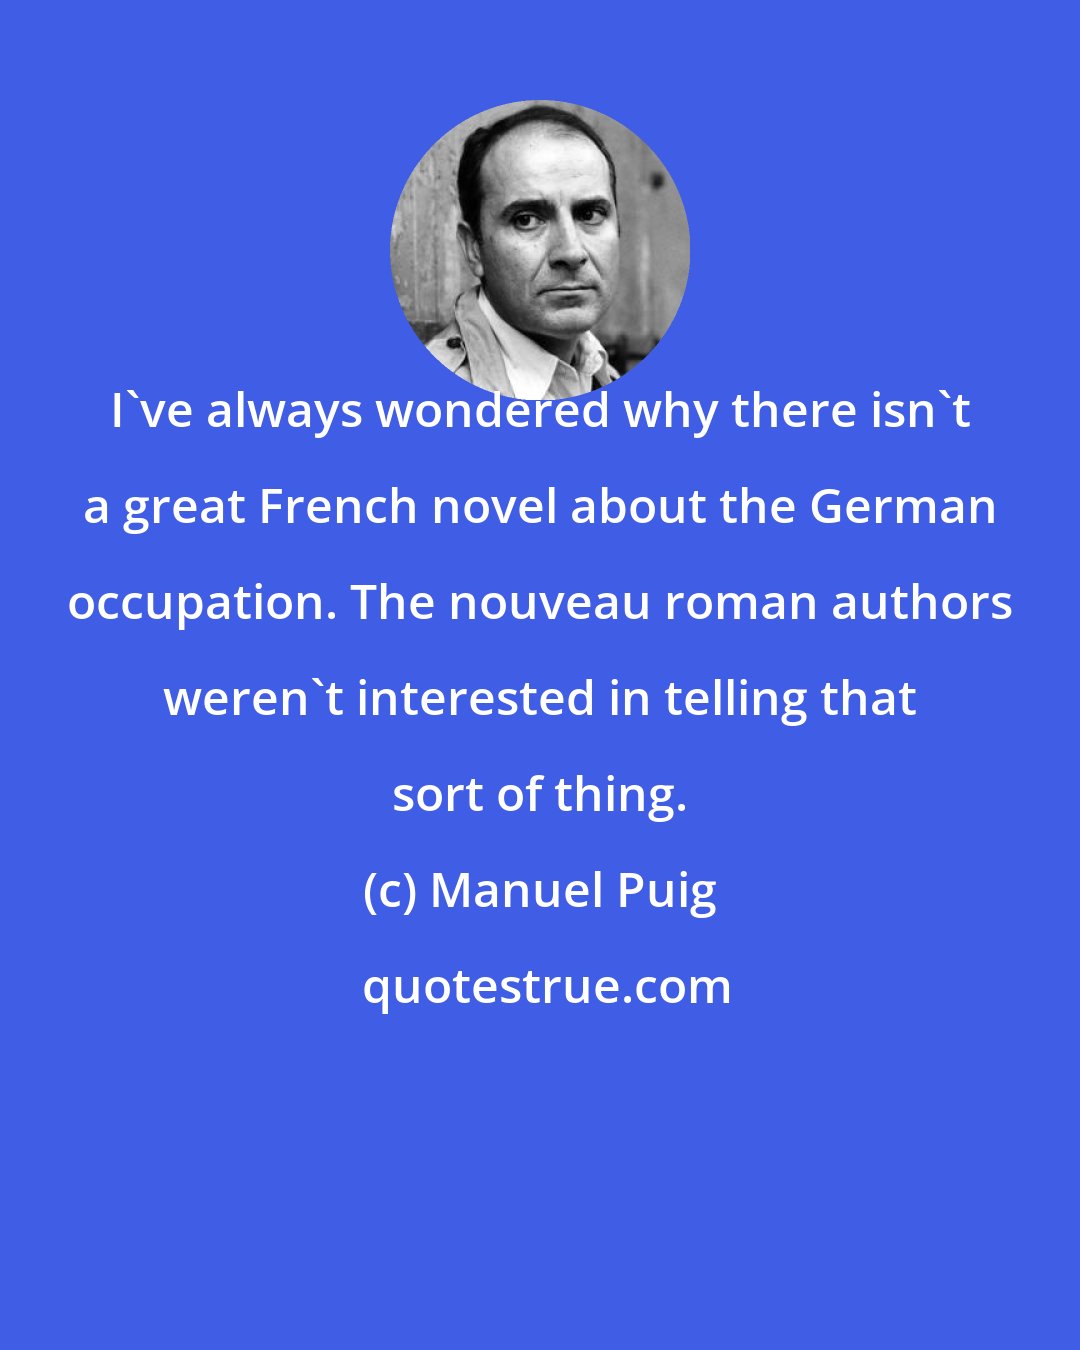 Manuel Puig: I've always wondered why there isn't a great French novel about the German occupation. The nouveau roman authors weren't interested in telling that sort of thing.